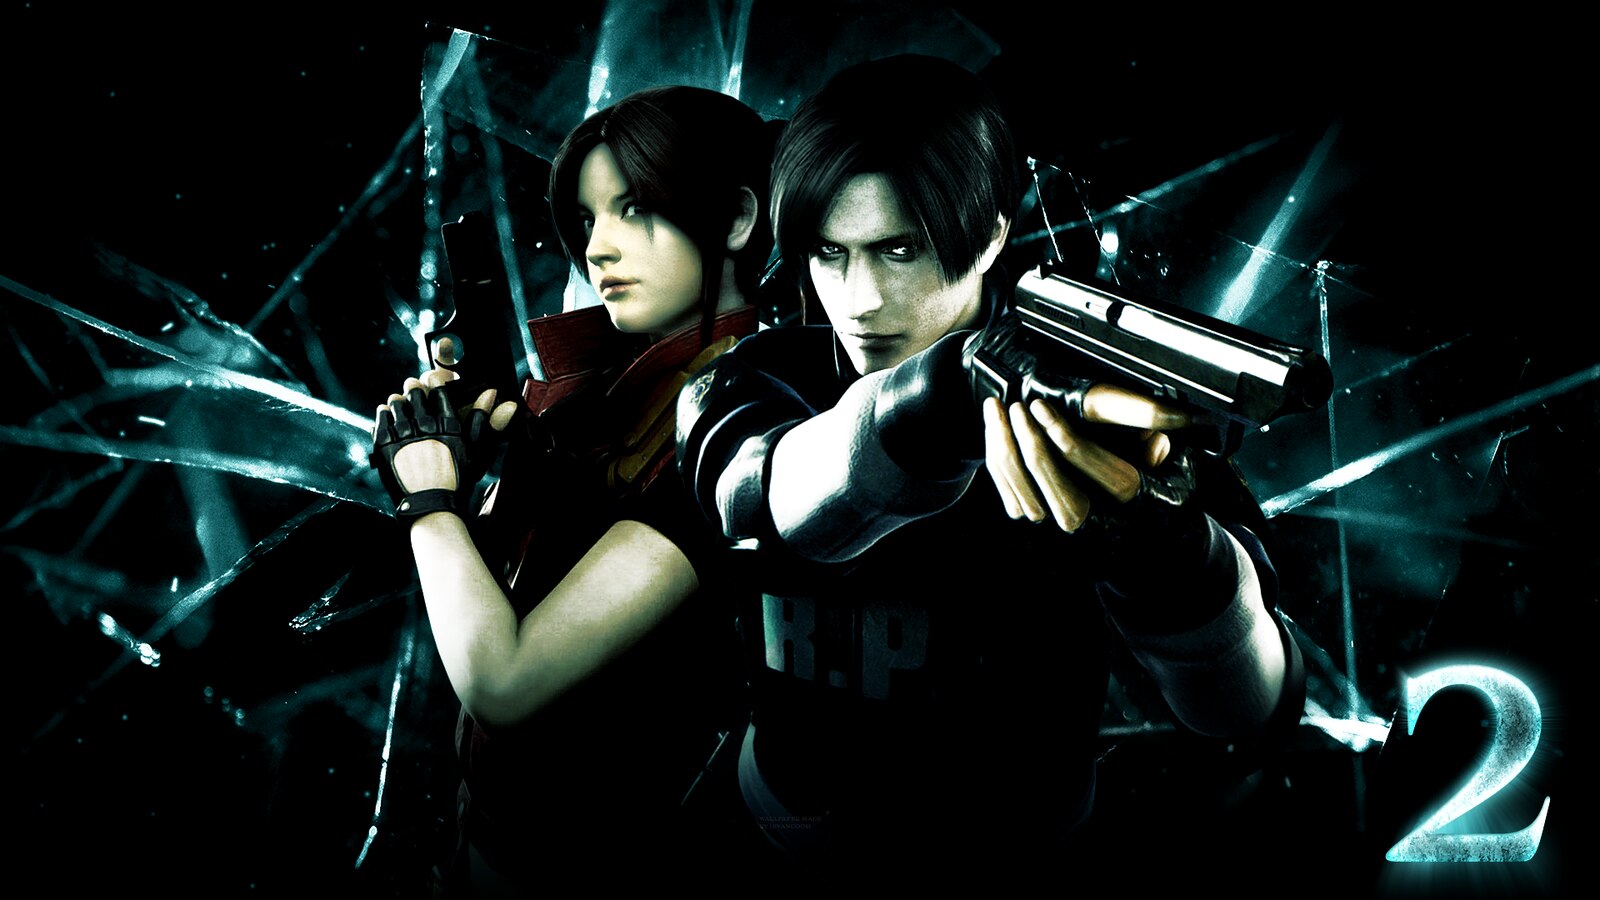 Piano Roll (Resident Evil Code: Veronica)